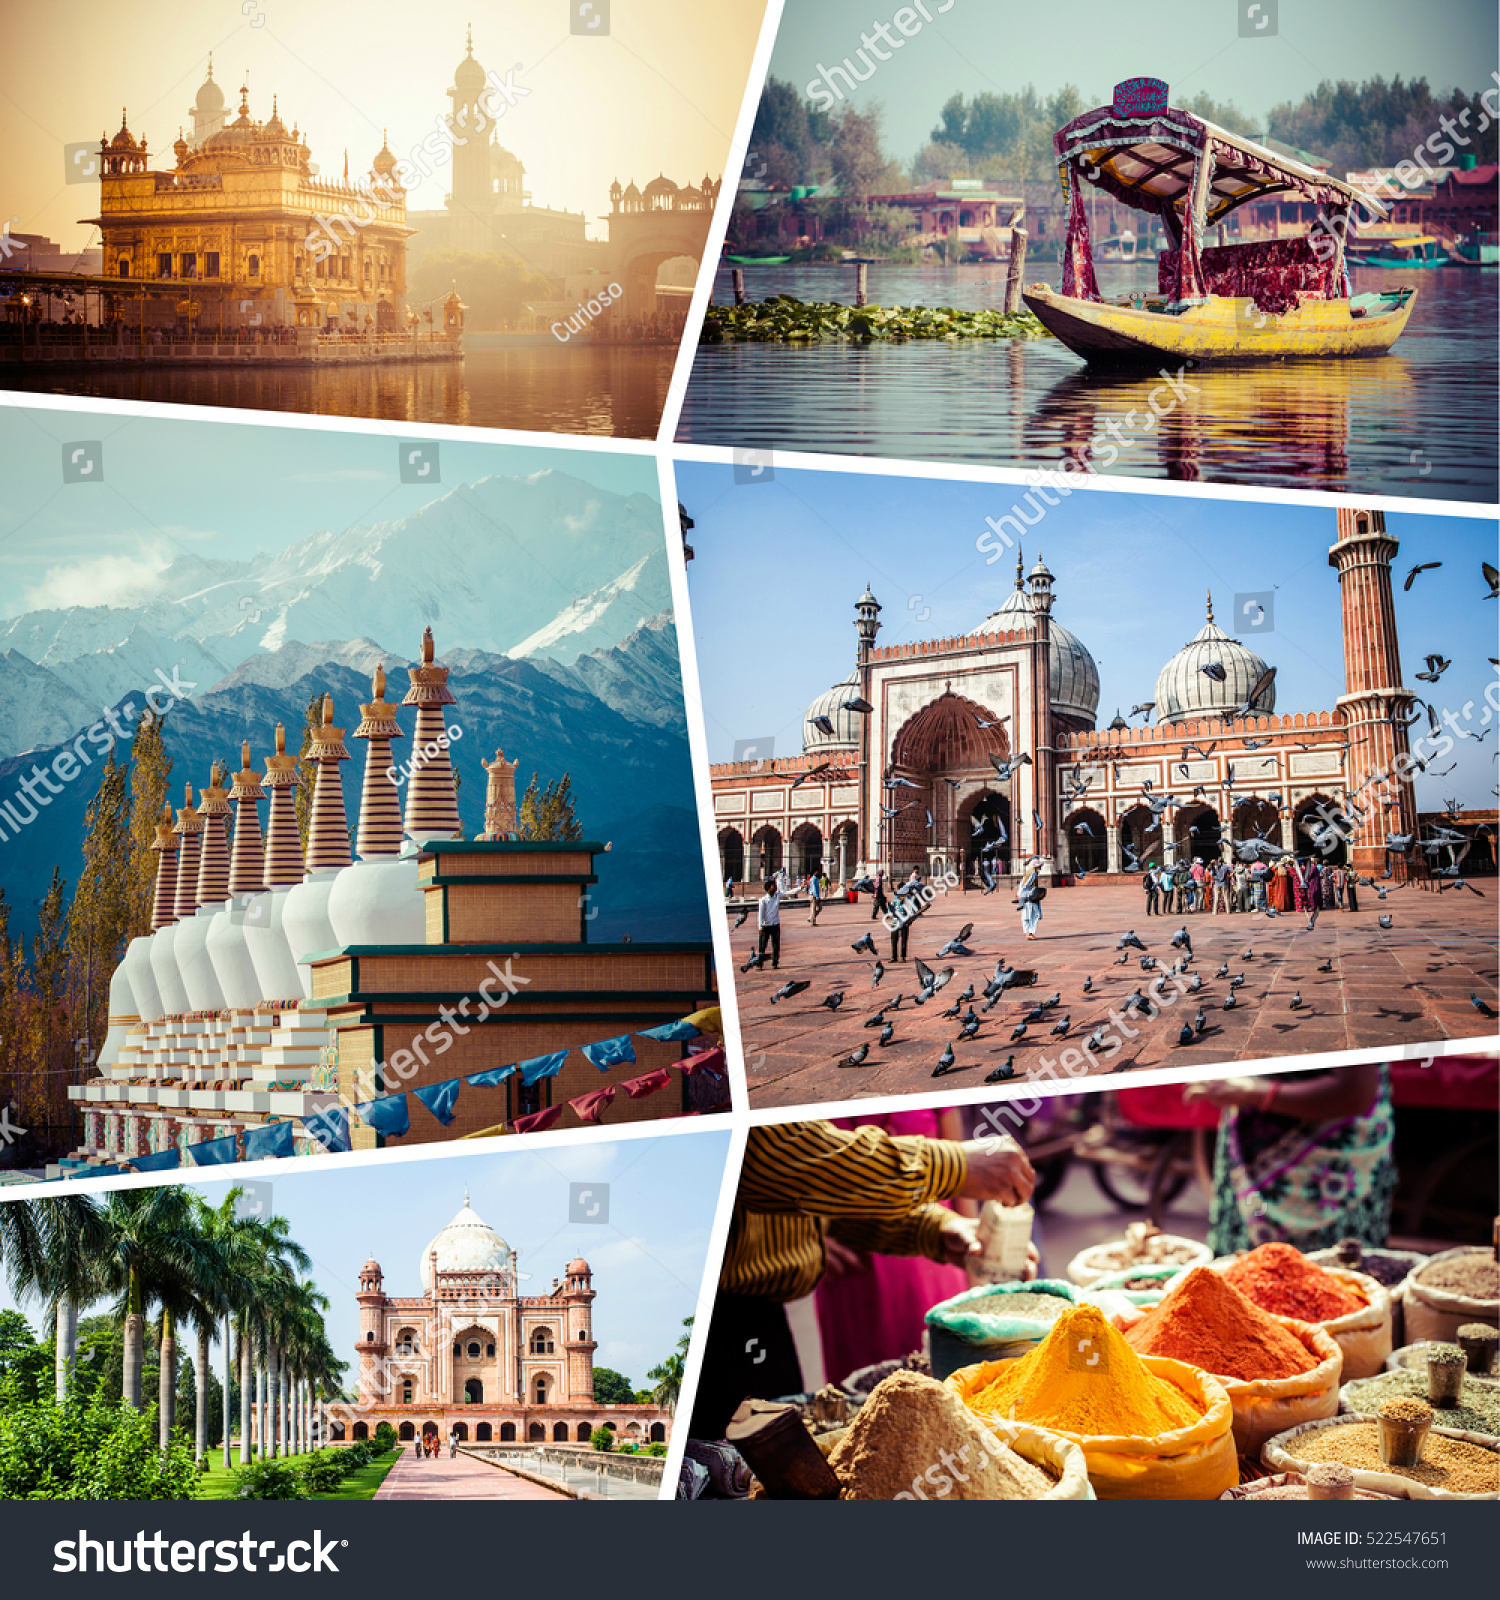 Collage India Images Travel Background My Stock Photo 522547651